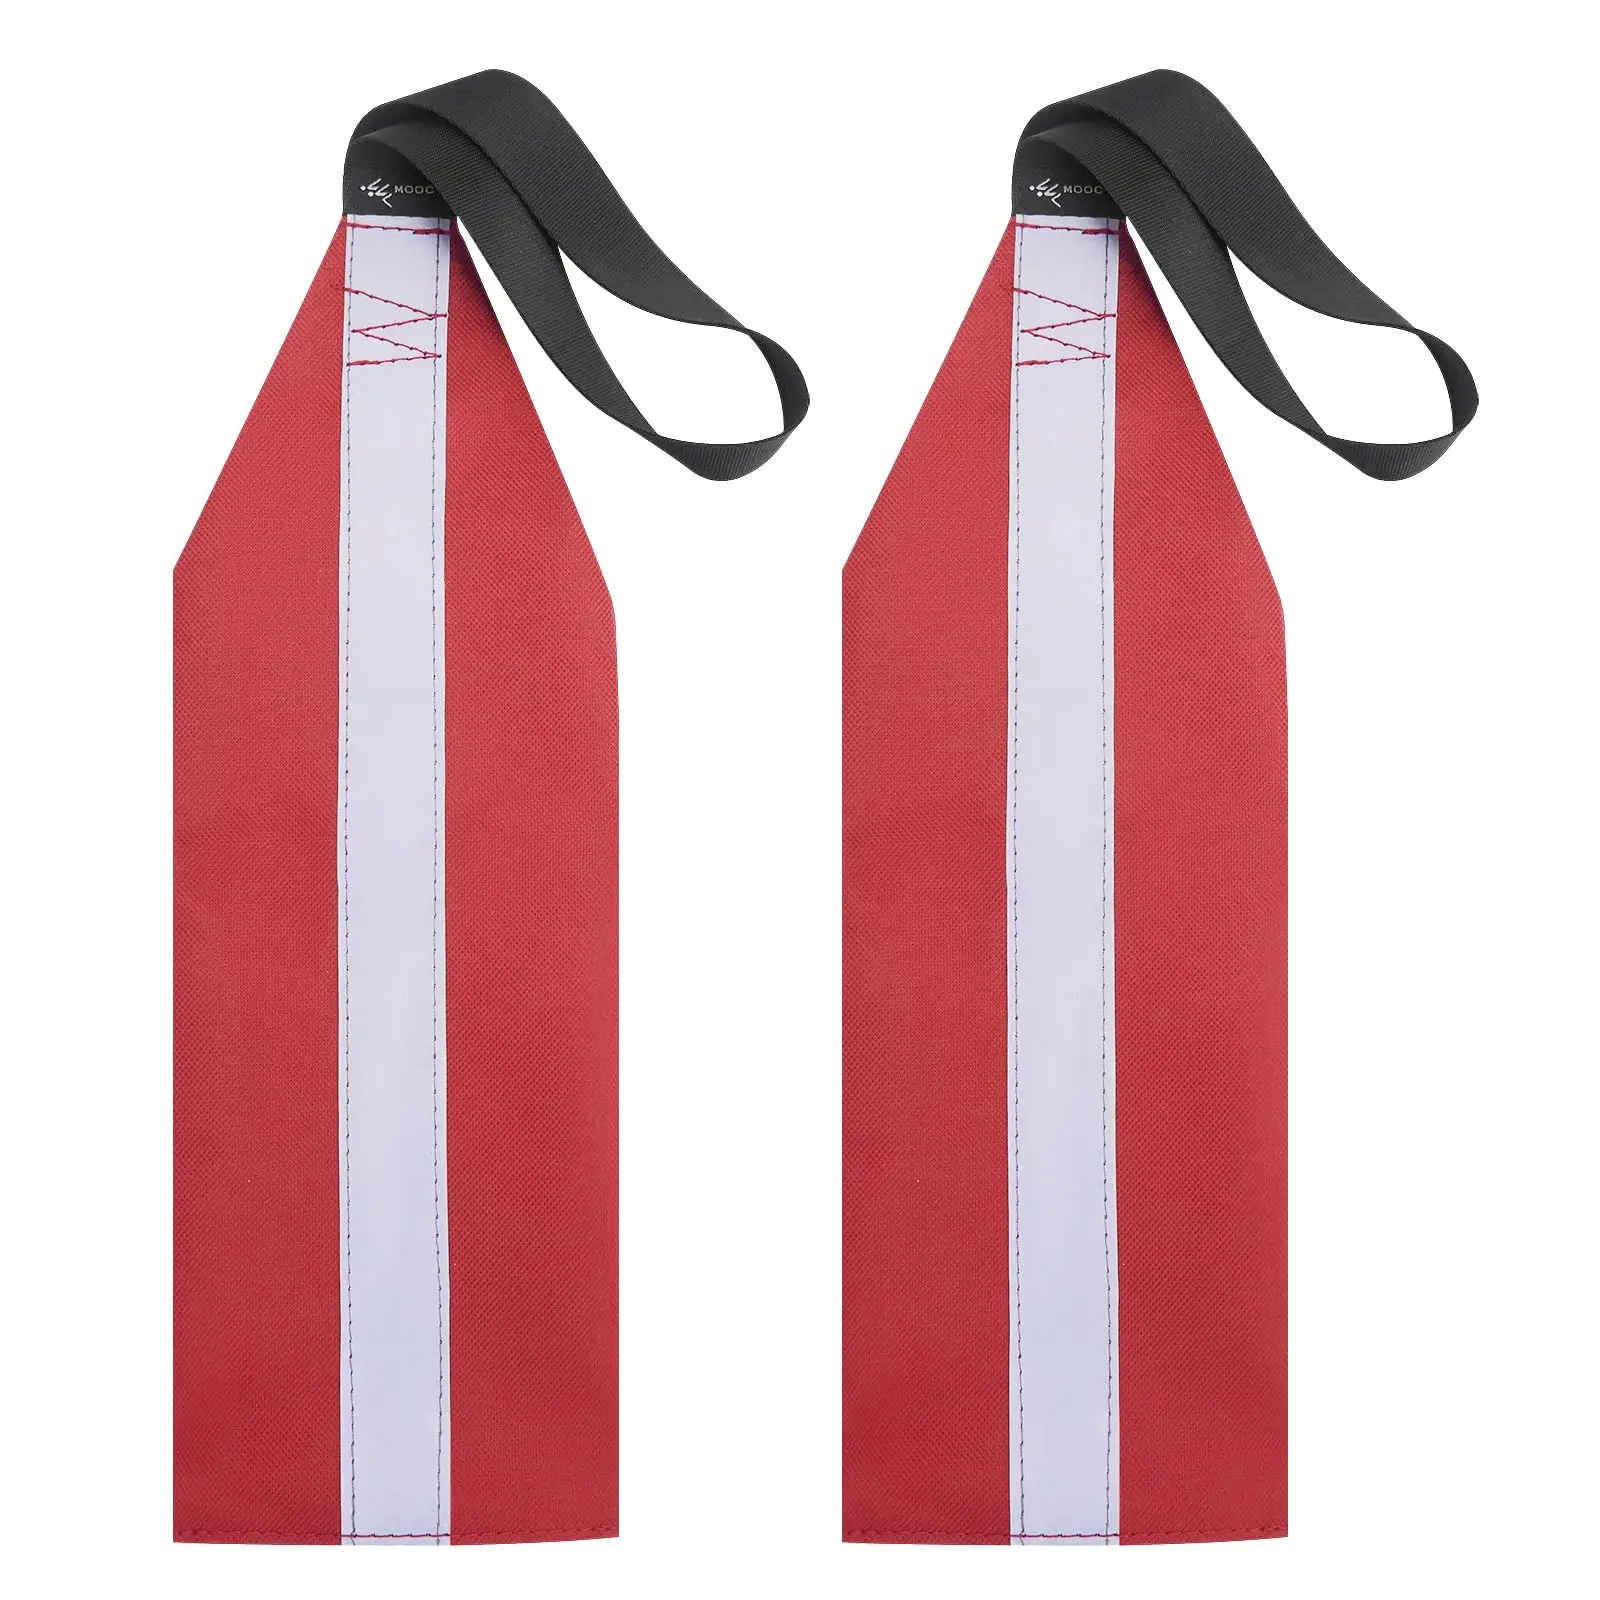 Red Flag Truck Loads (Pack of 2), Warning Flags for Kayak Safety Towing,Travel Trailer Tow Accessories 3pcs referee signal flags red signal flags warning traffic flags commander flags